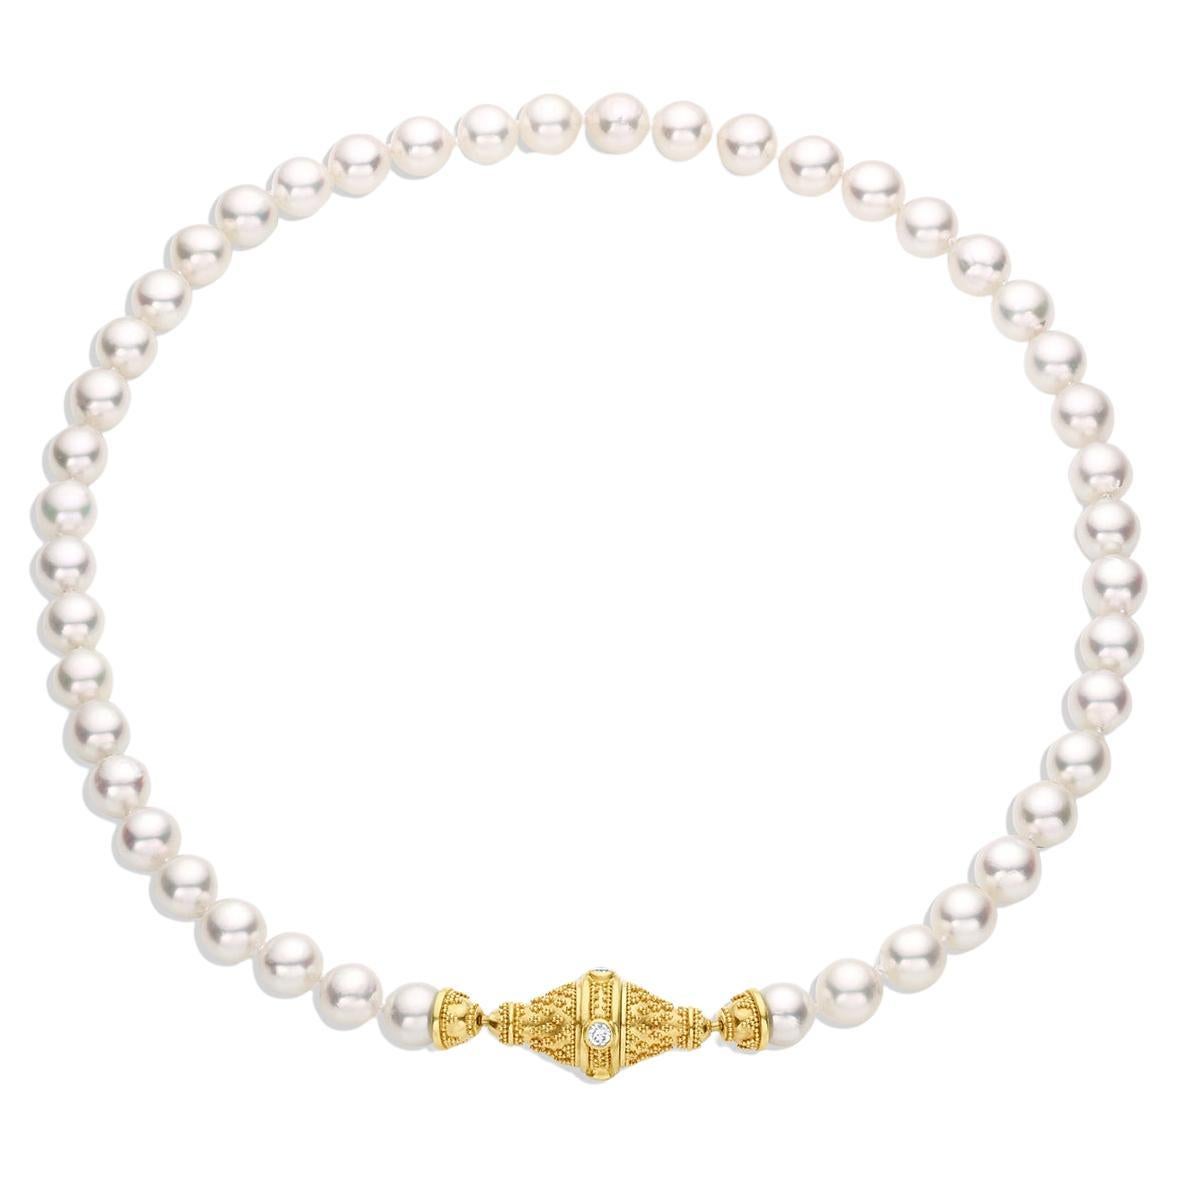 Kent Raible Akoya Pearl Necklace, 18 K Gold and Diamond clasp with Granulation For Sale